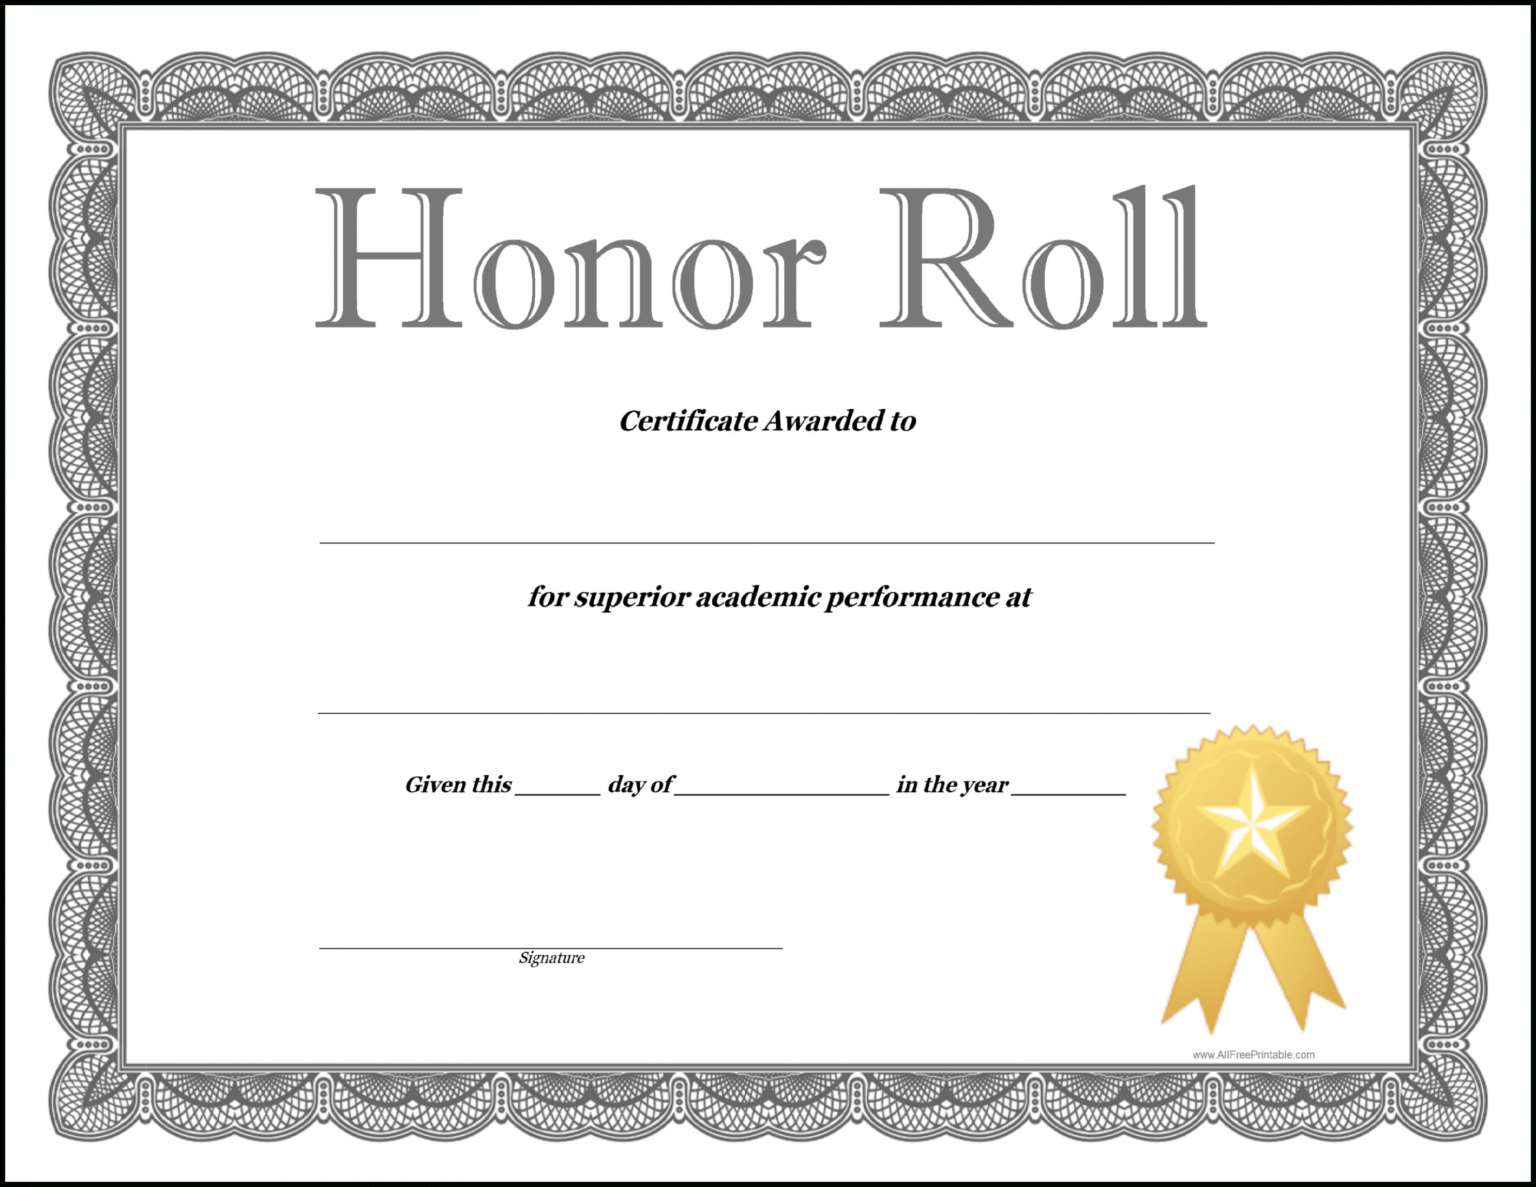 Honor Roll Certificate Template Professional Template